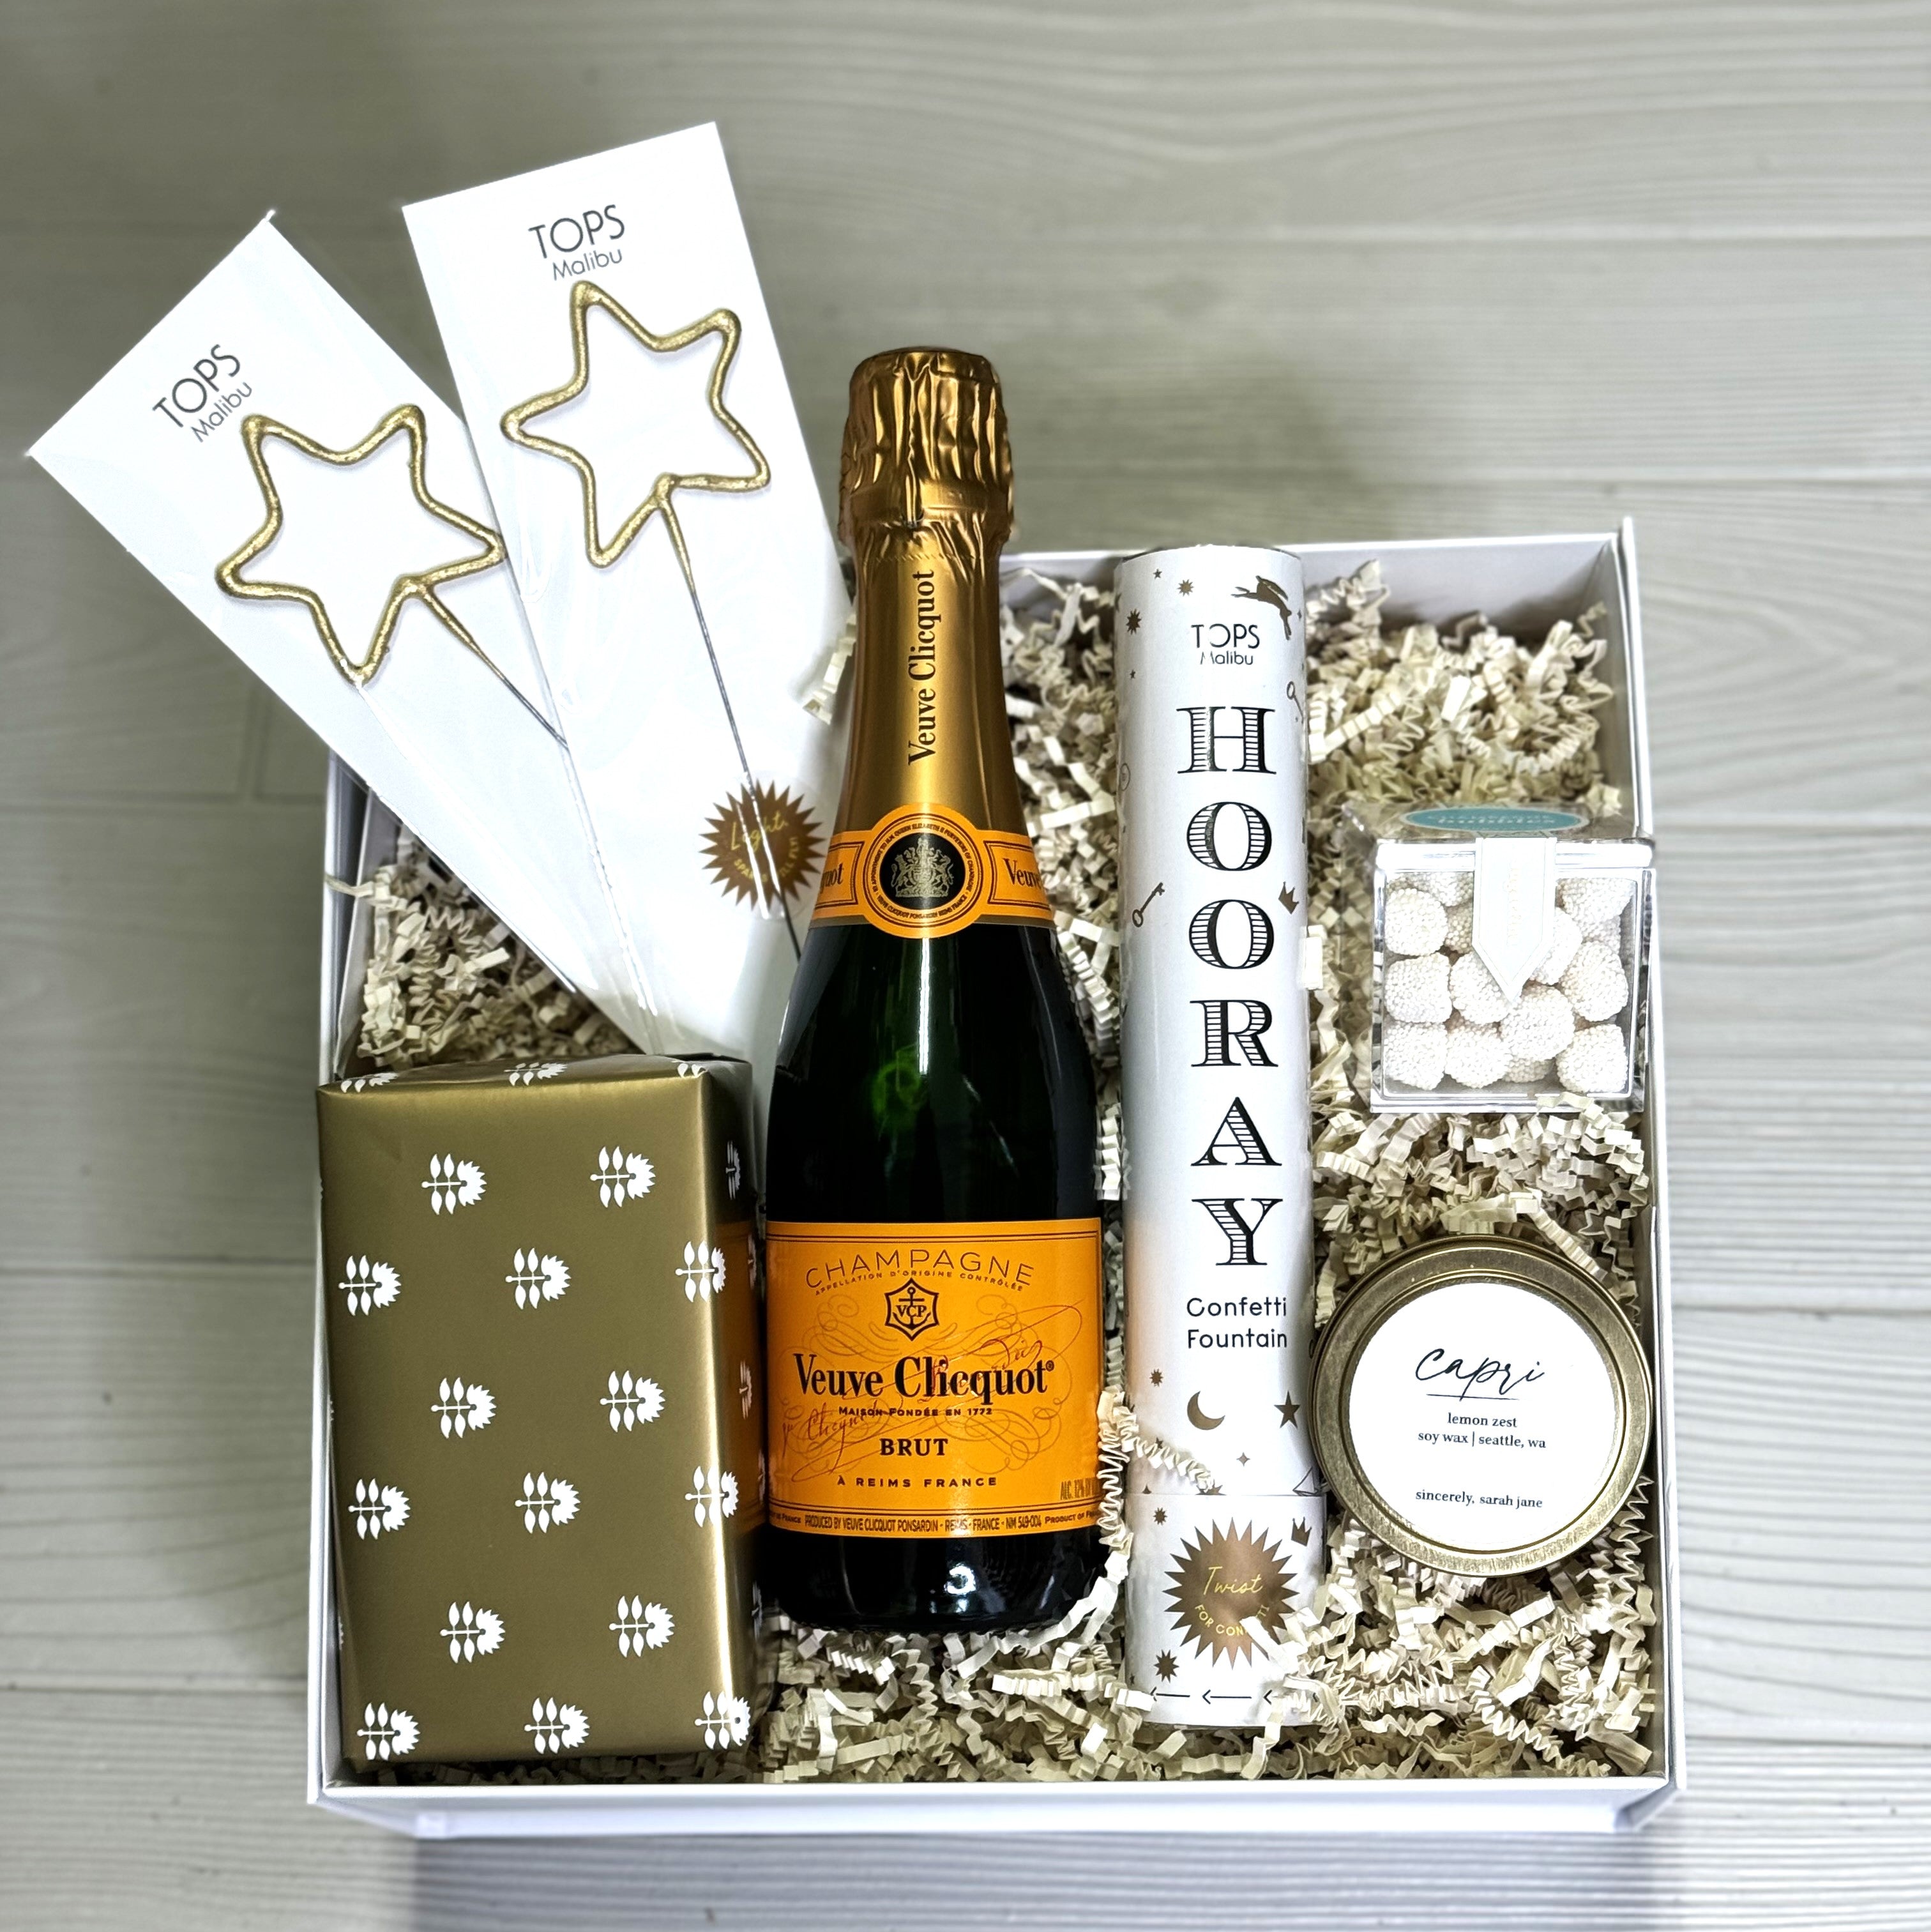 Celebratory gift baskets includes Veuve Champagne, sparklers, cookies, confetti fountain, candle, Sugarfina candy, packaged in a luxury gift box